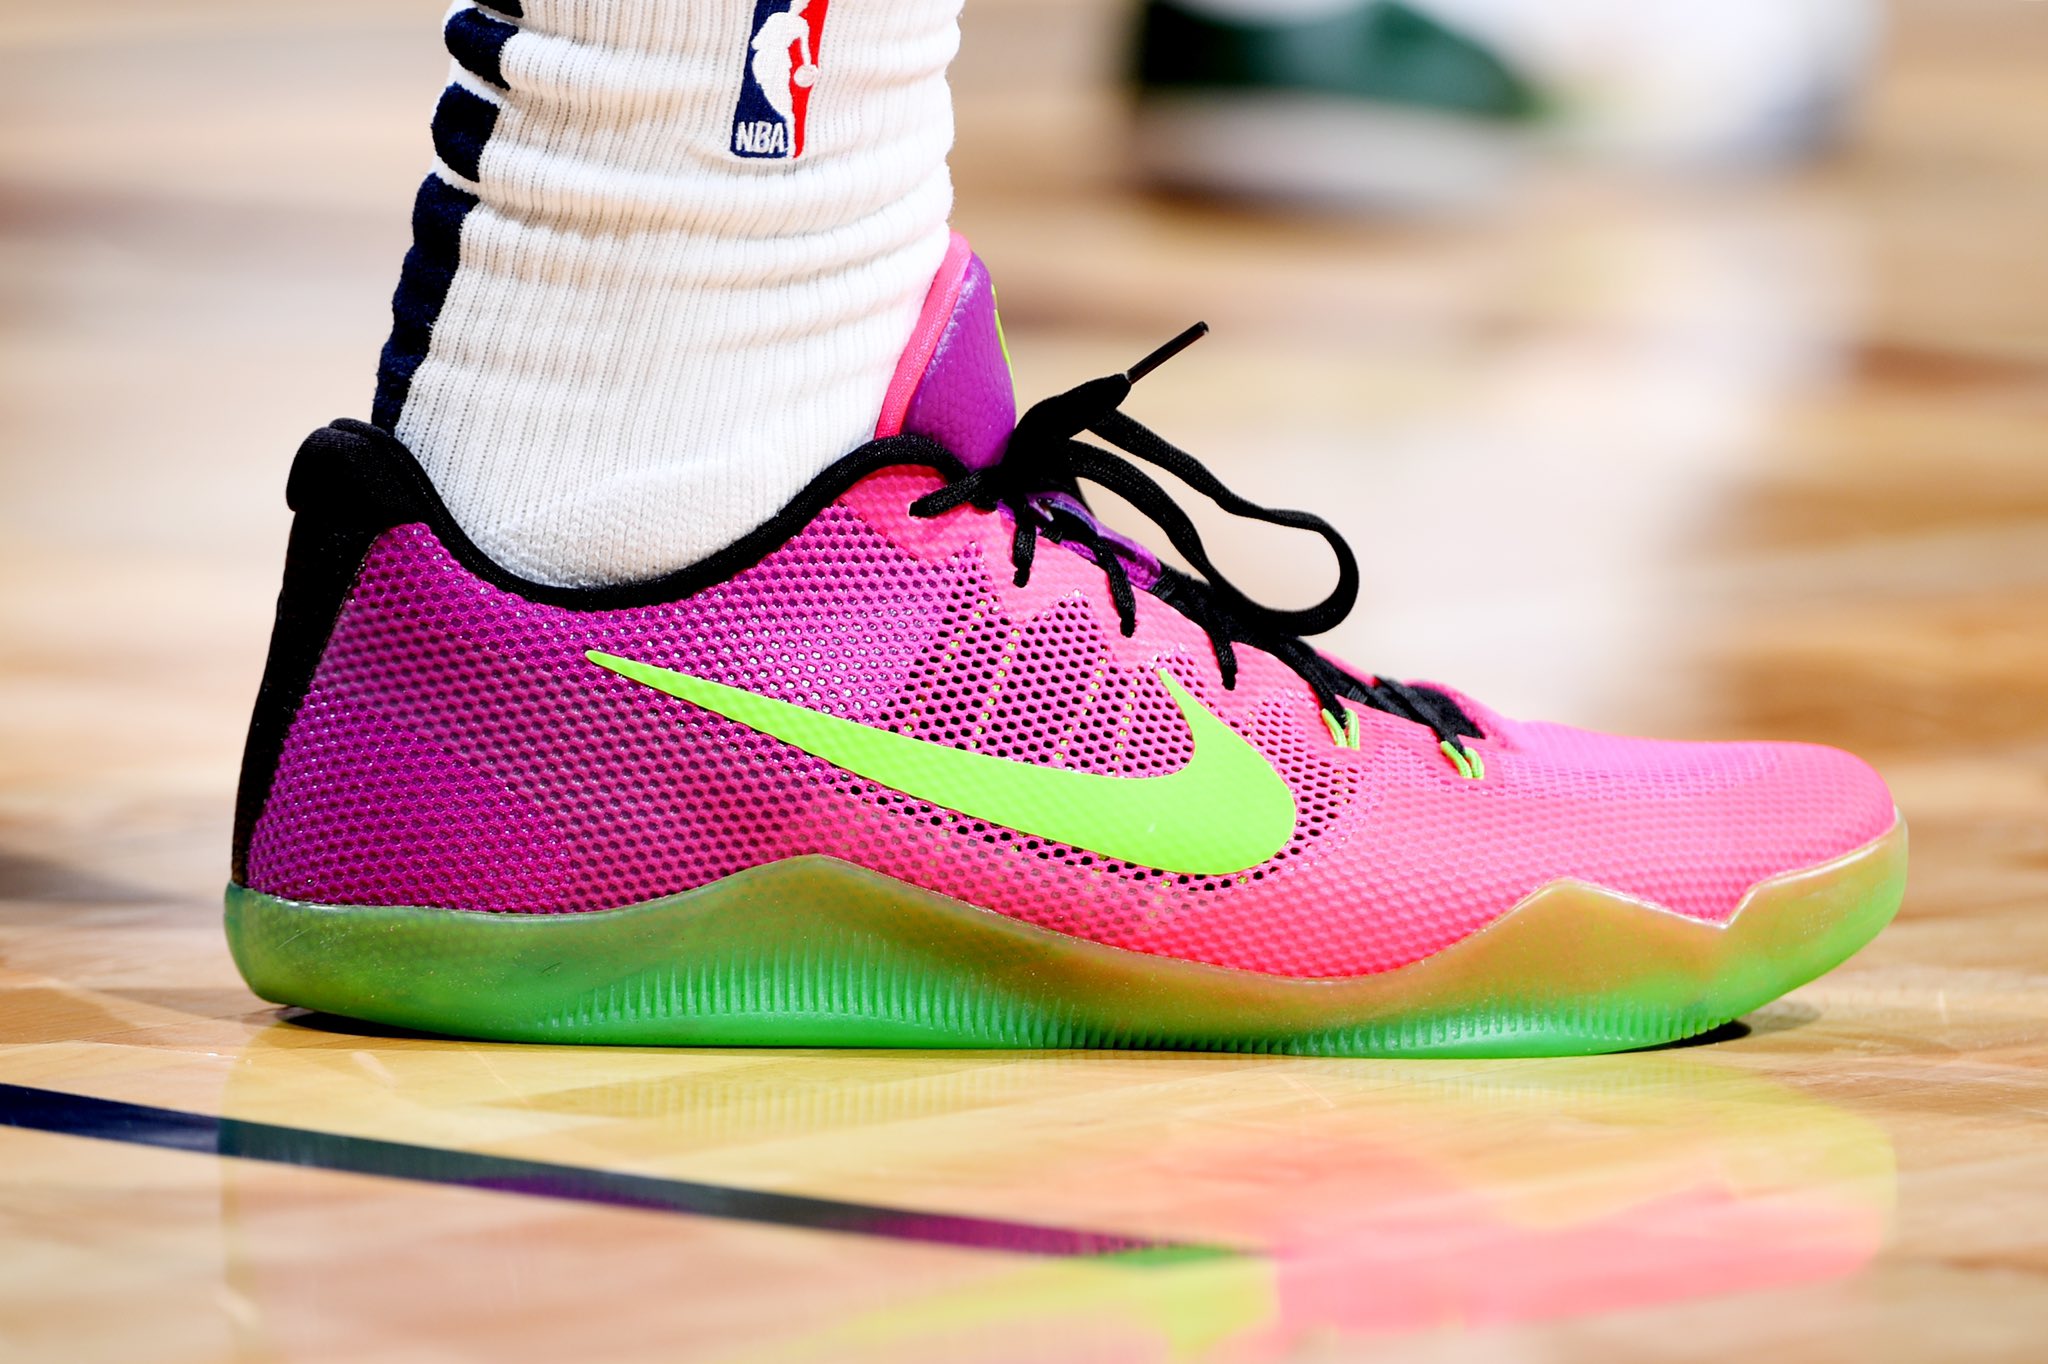 lade minstens Gewoon SoleCollector.com on Twitter: "#SoleWatch: @TreyLyles wearing the “ Mambacurial” Nike Kobe 11 EM against the Bucks. 📸: @gwephoto  https://t.co/wpDD4BdWB0" / Twitter